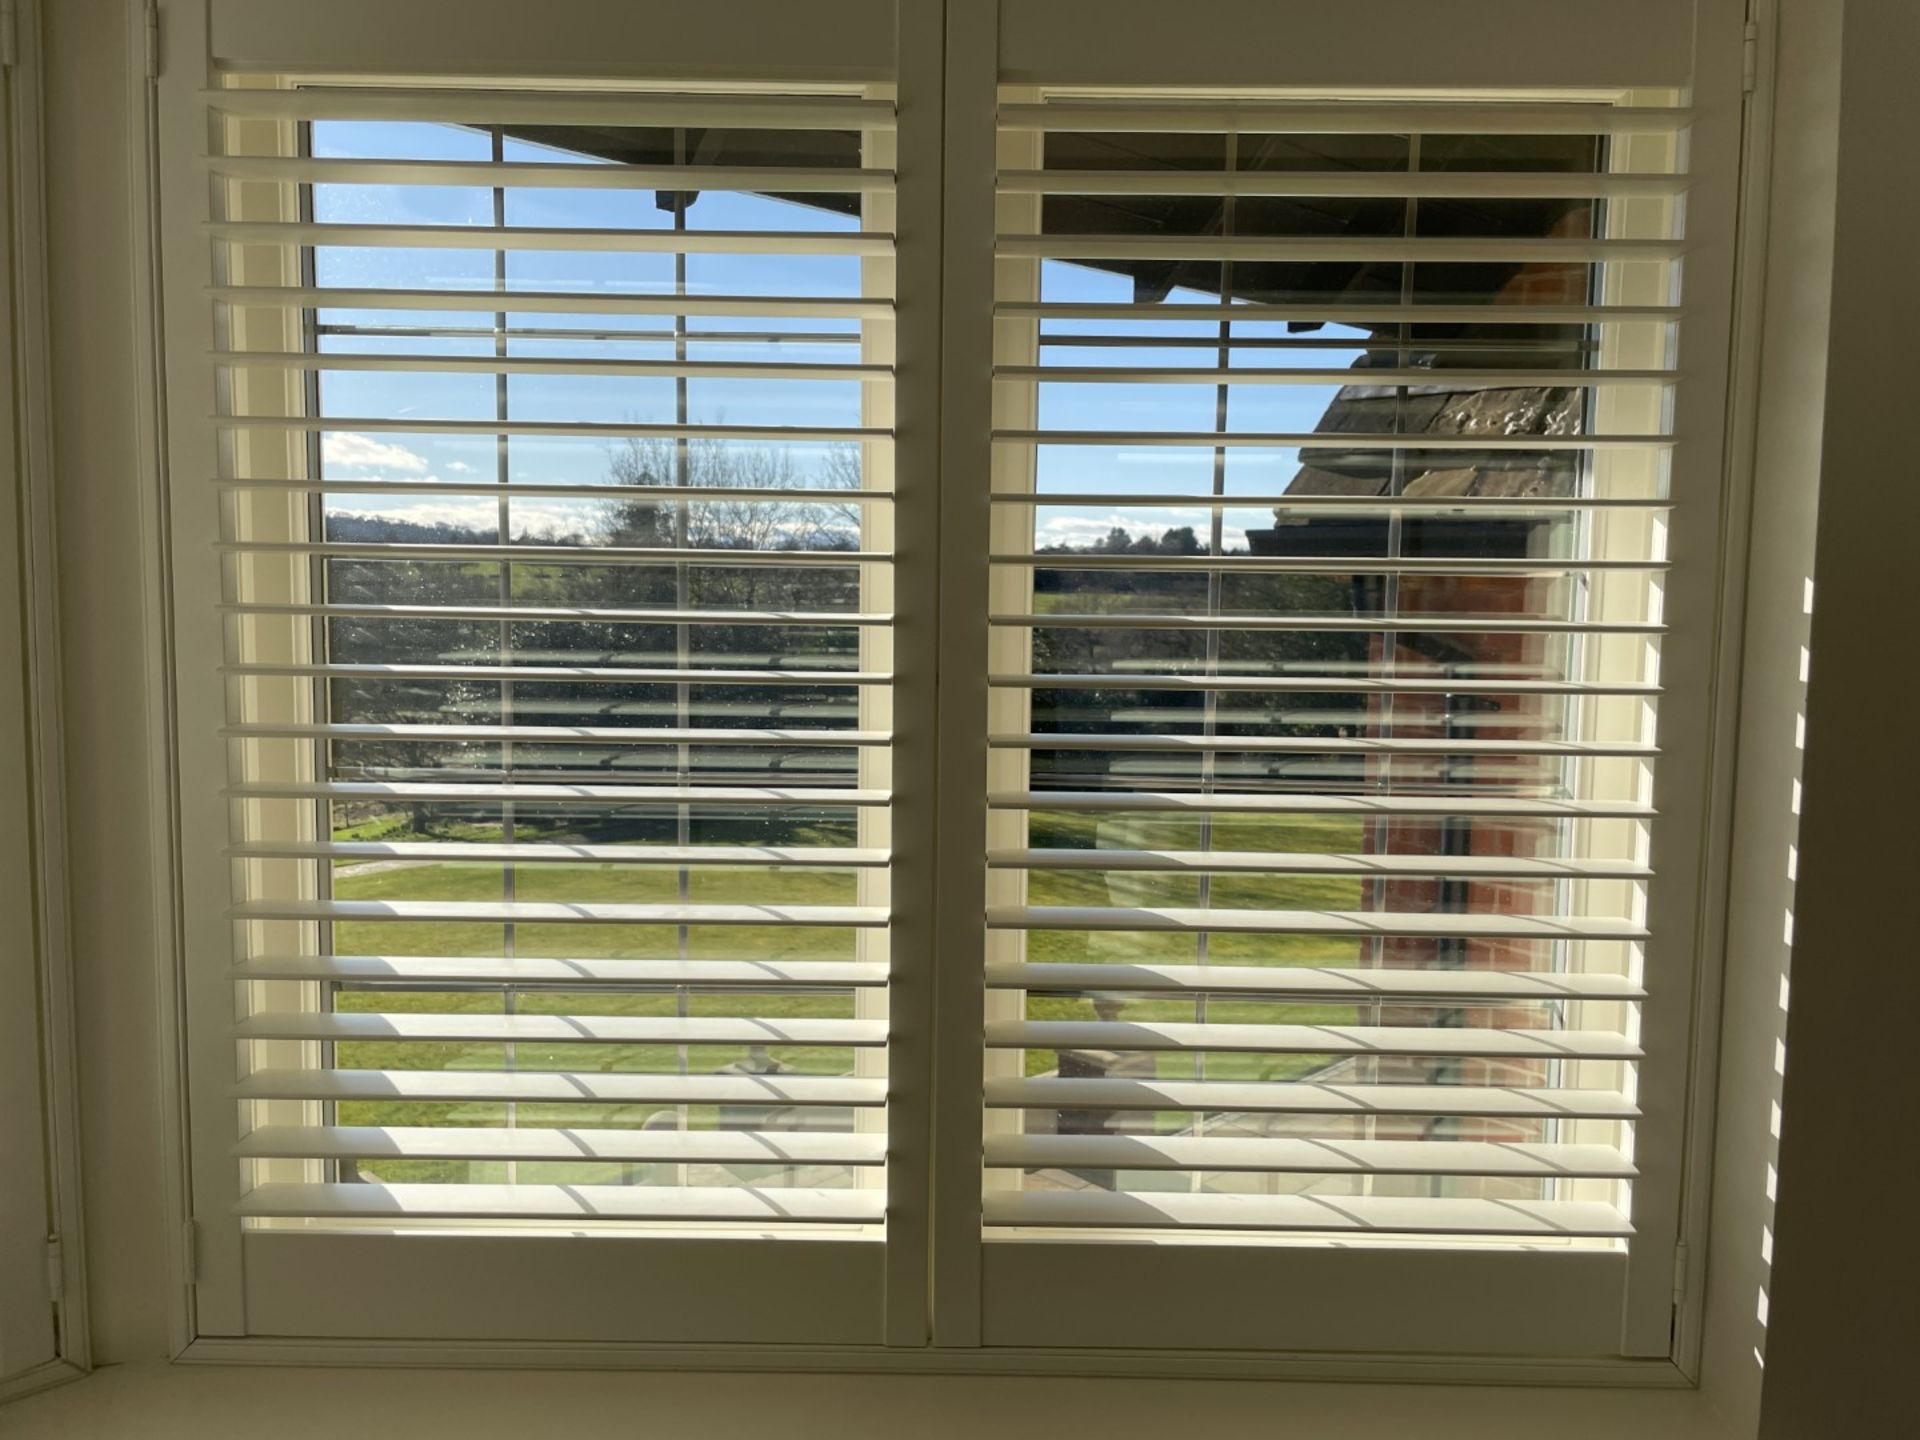 1 x Hardwood Timber Double Glazed Leaded 2-Pane Window Frame fitted with Shutter Blinds - Ref: - Image 12 of 12